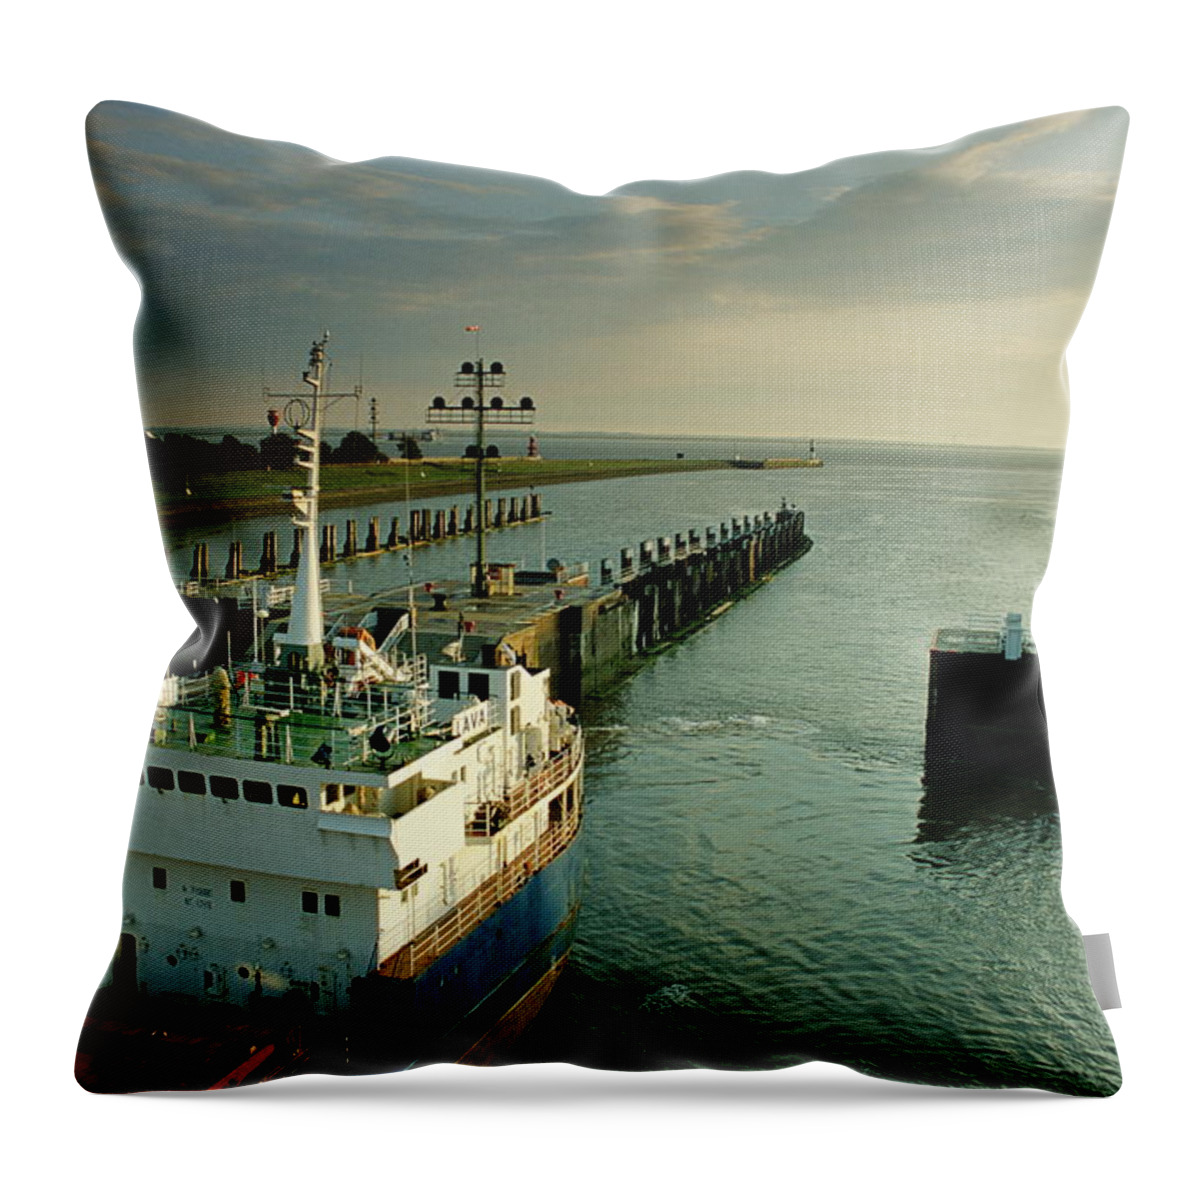 Freight Transportation Throw Pillow featuring the photograph Container Ship In A Lock, Brunsbuttel by Jorg Greuel